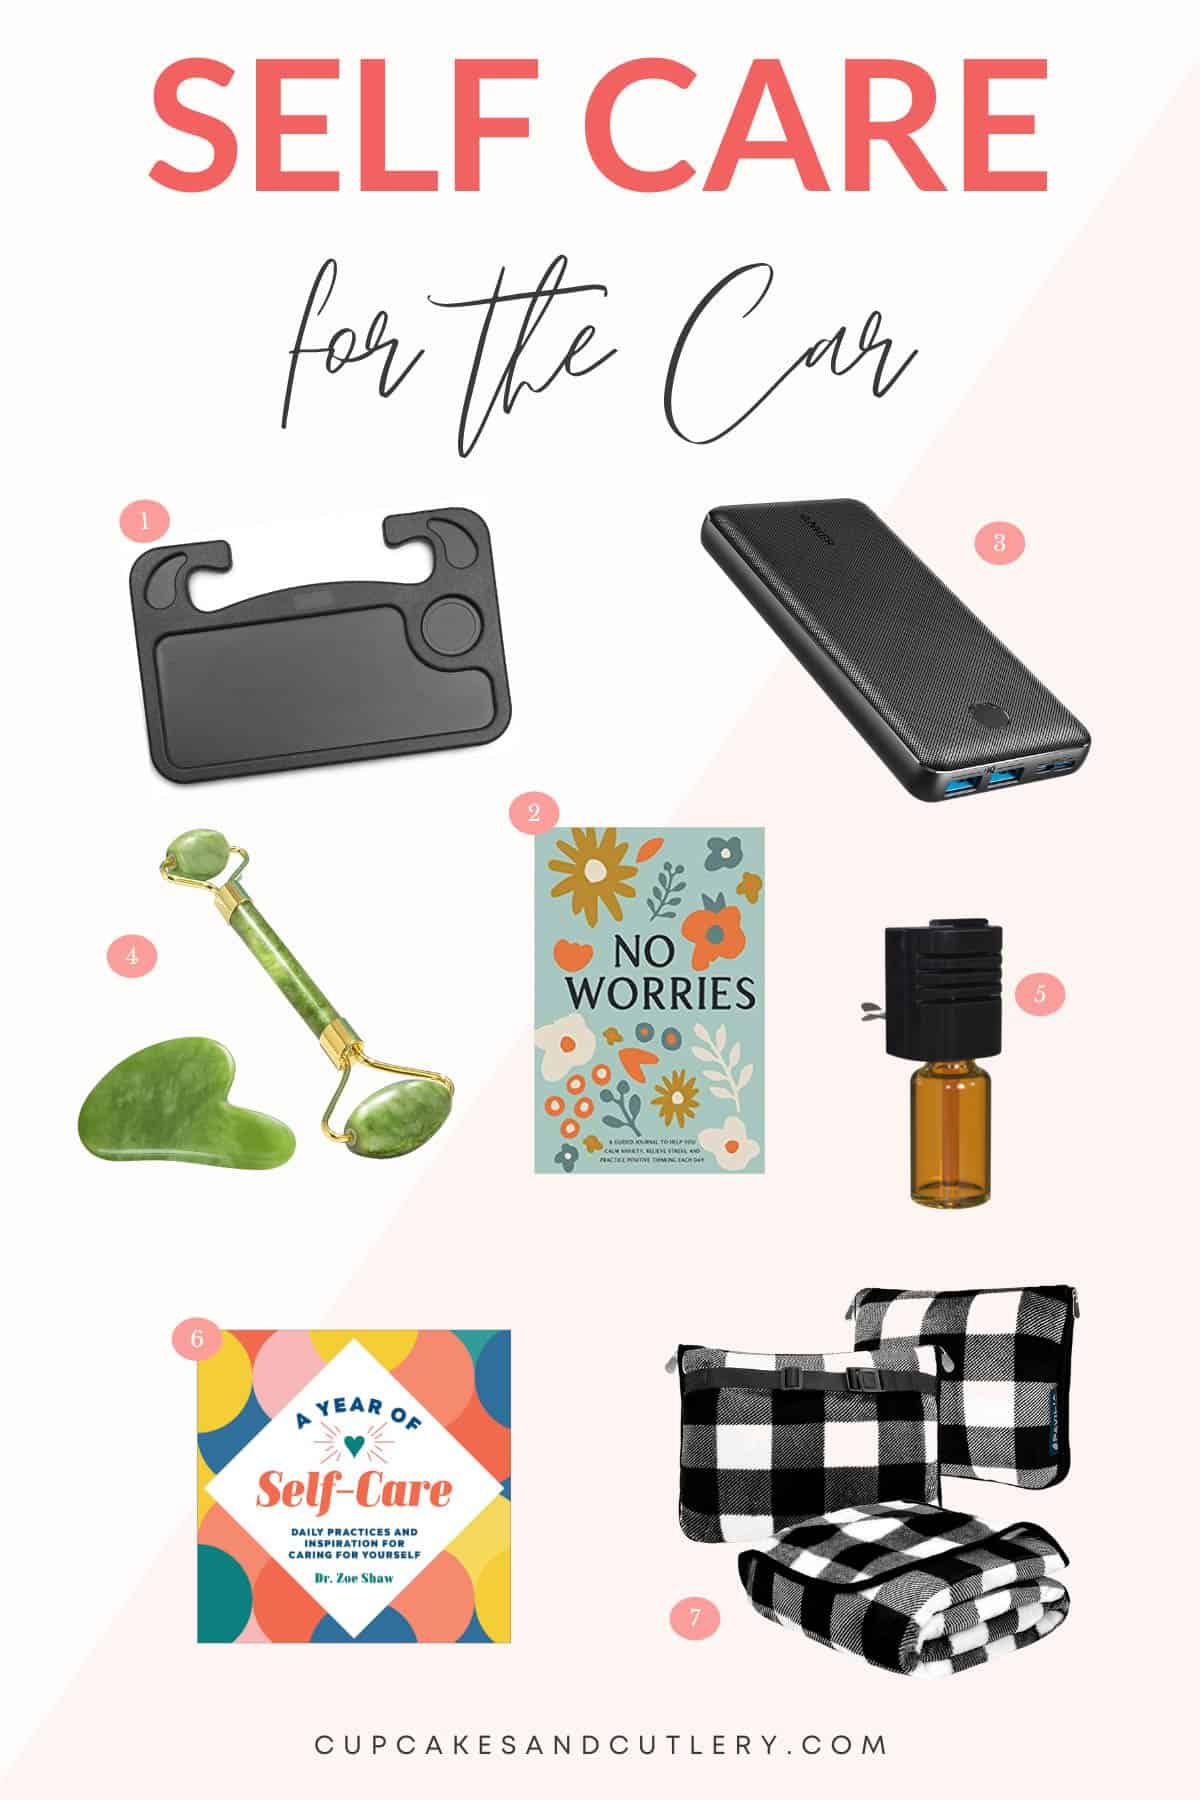 Clollage of essentials for doing self care in the car.